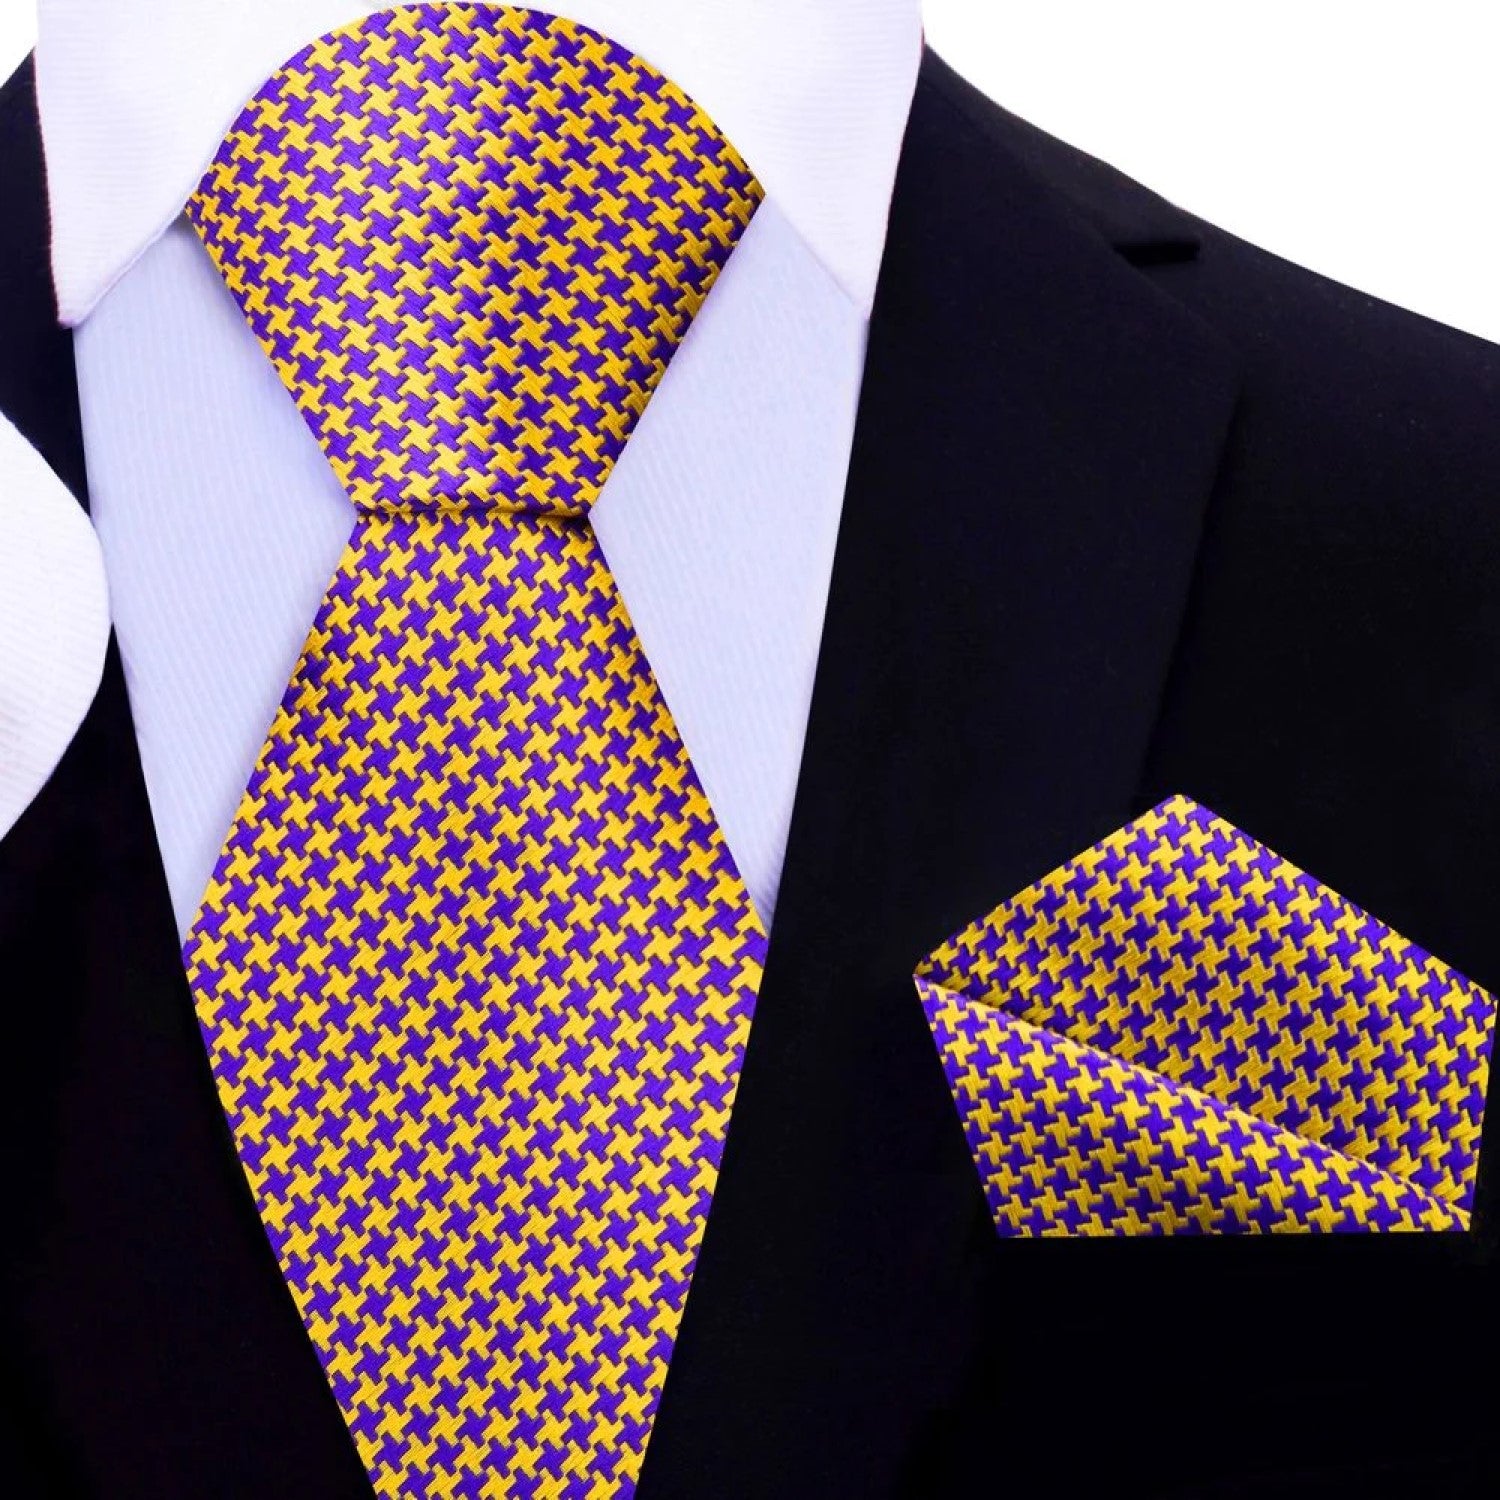 Gold and Purple Hounds-tooth Tie and Pocket Square